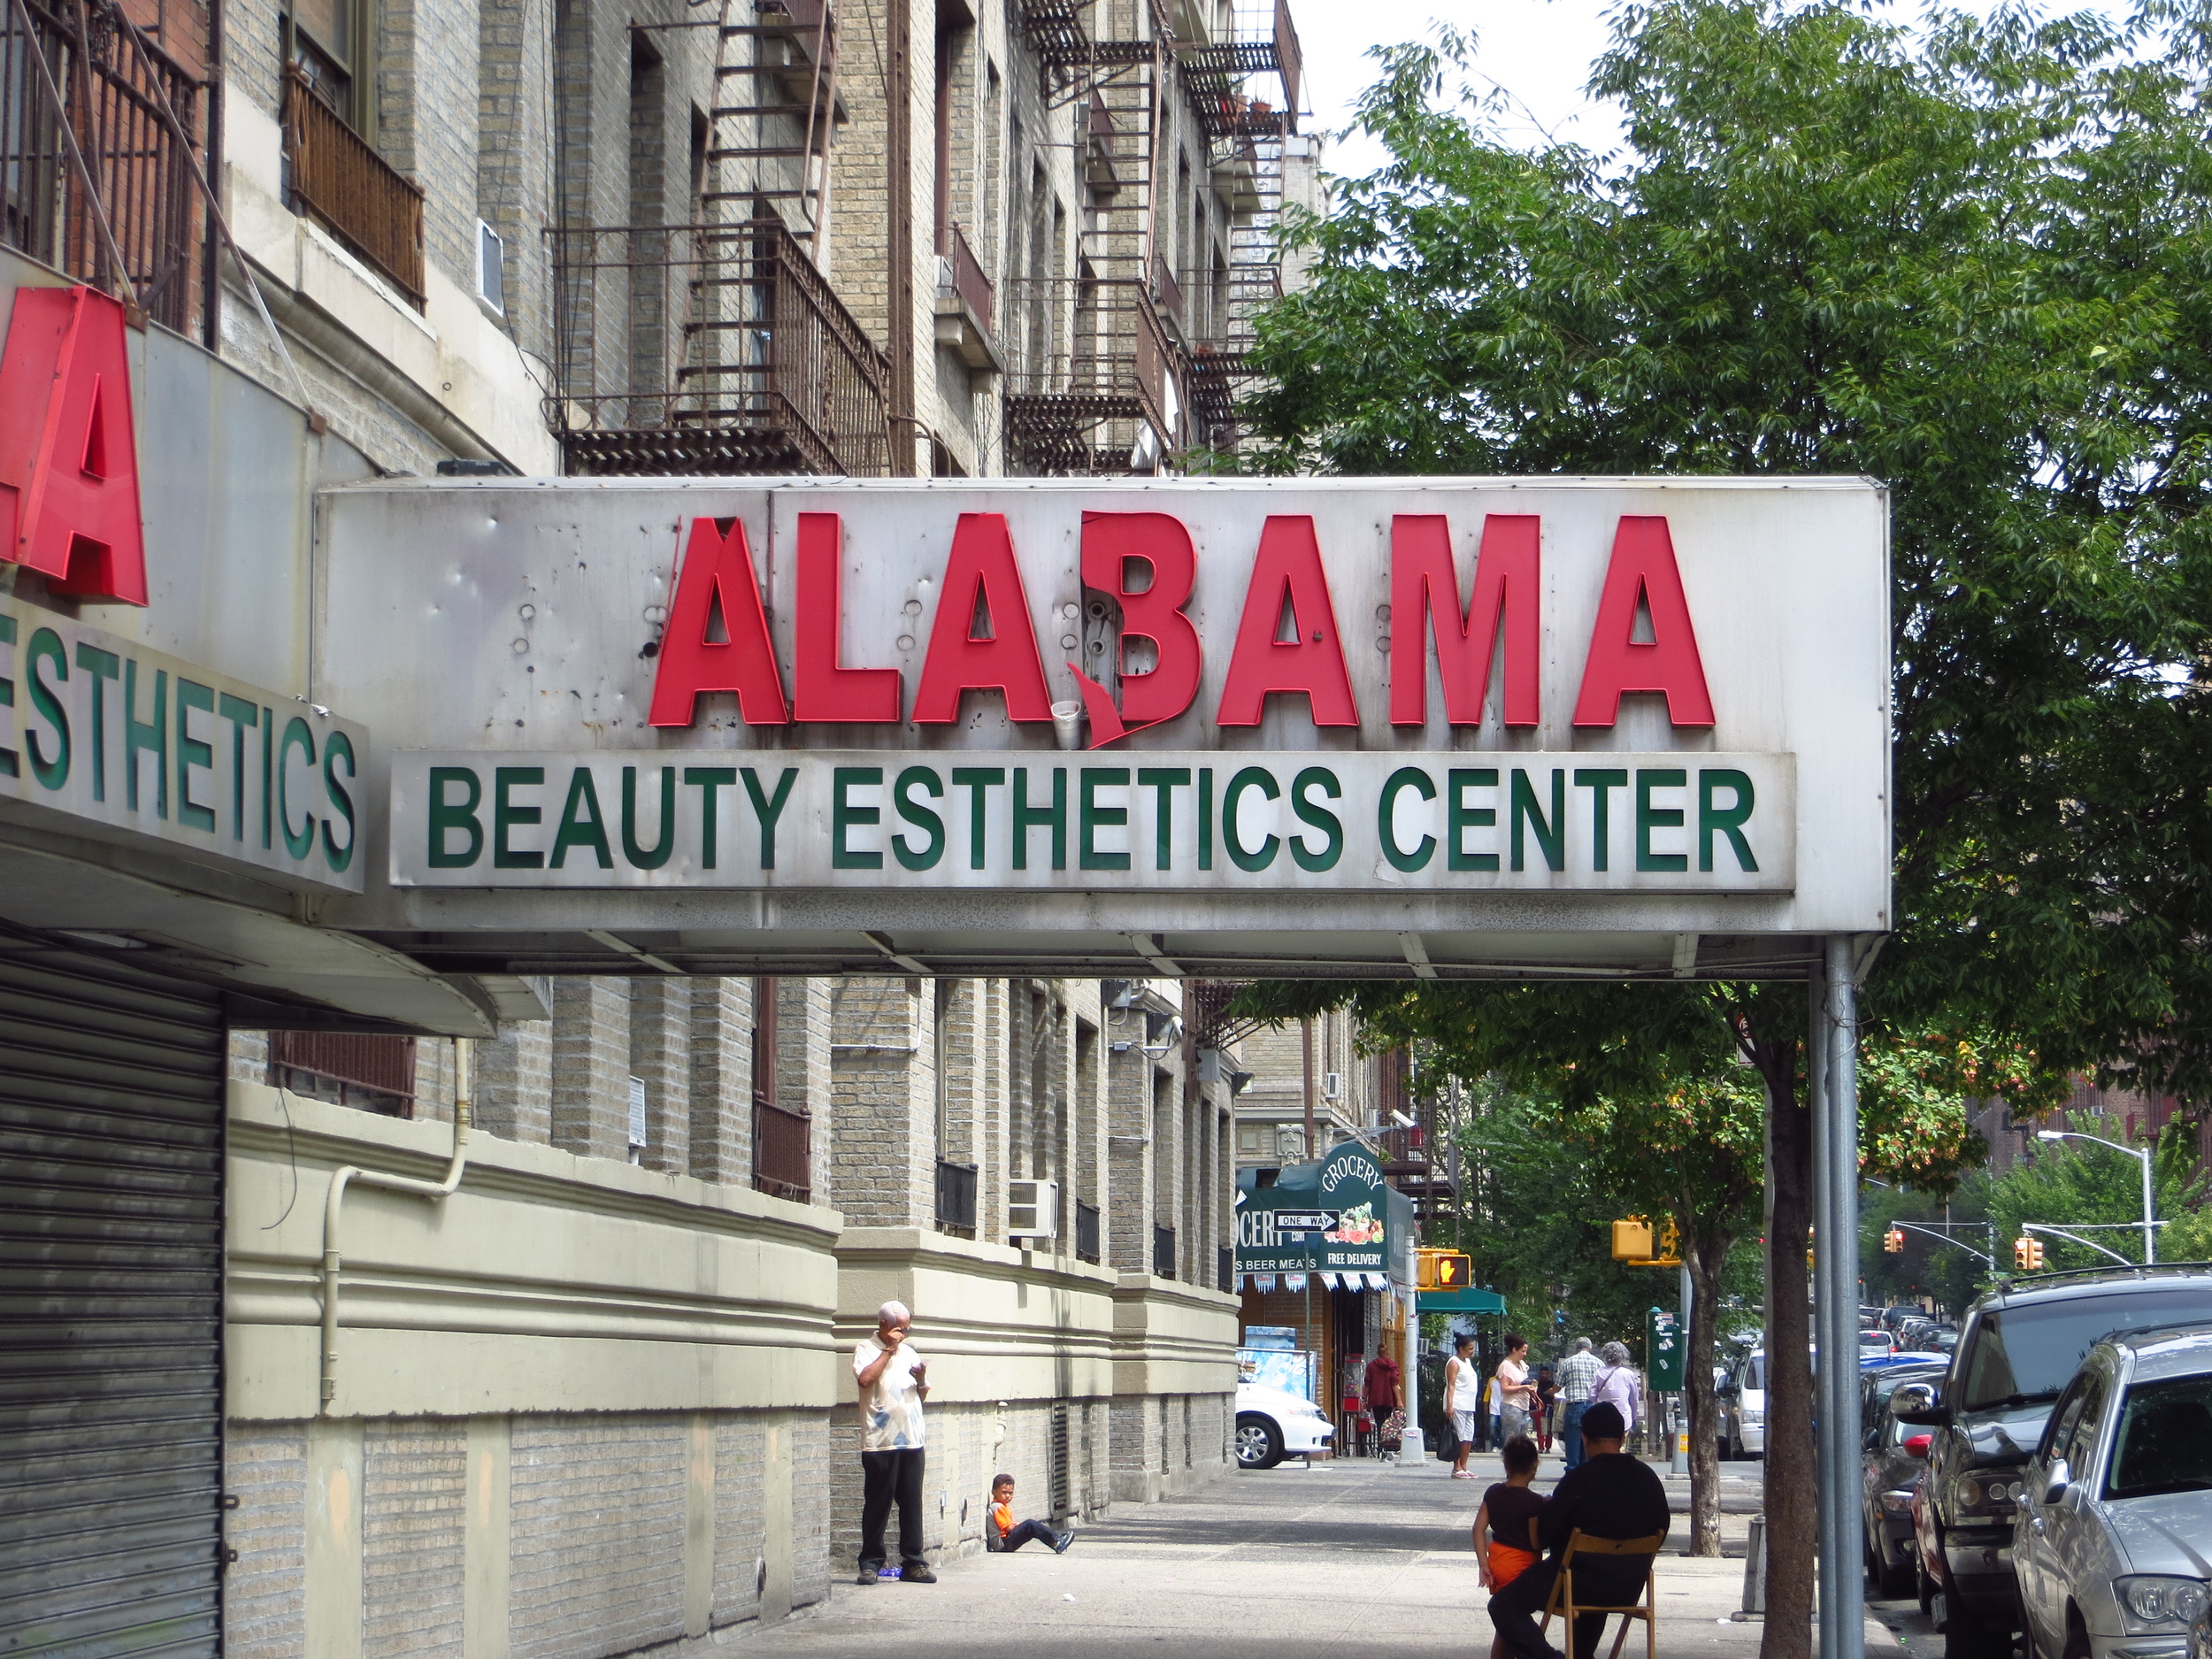 I was going to make a joke about how they misspelled "aesthetics", but thankfully I Googled the word first. 